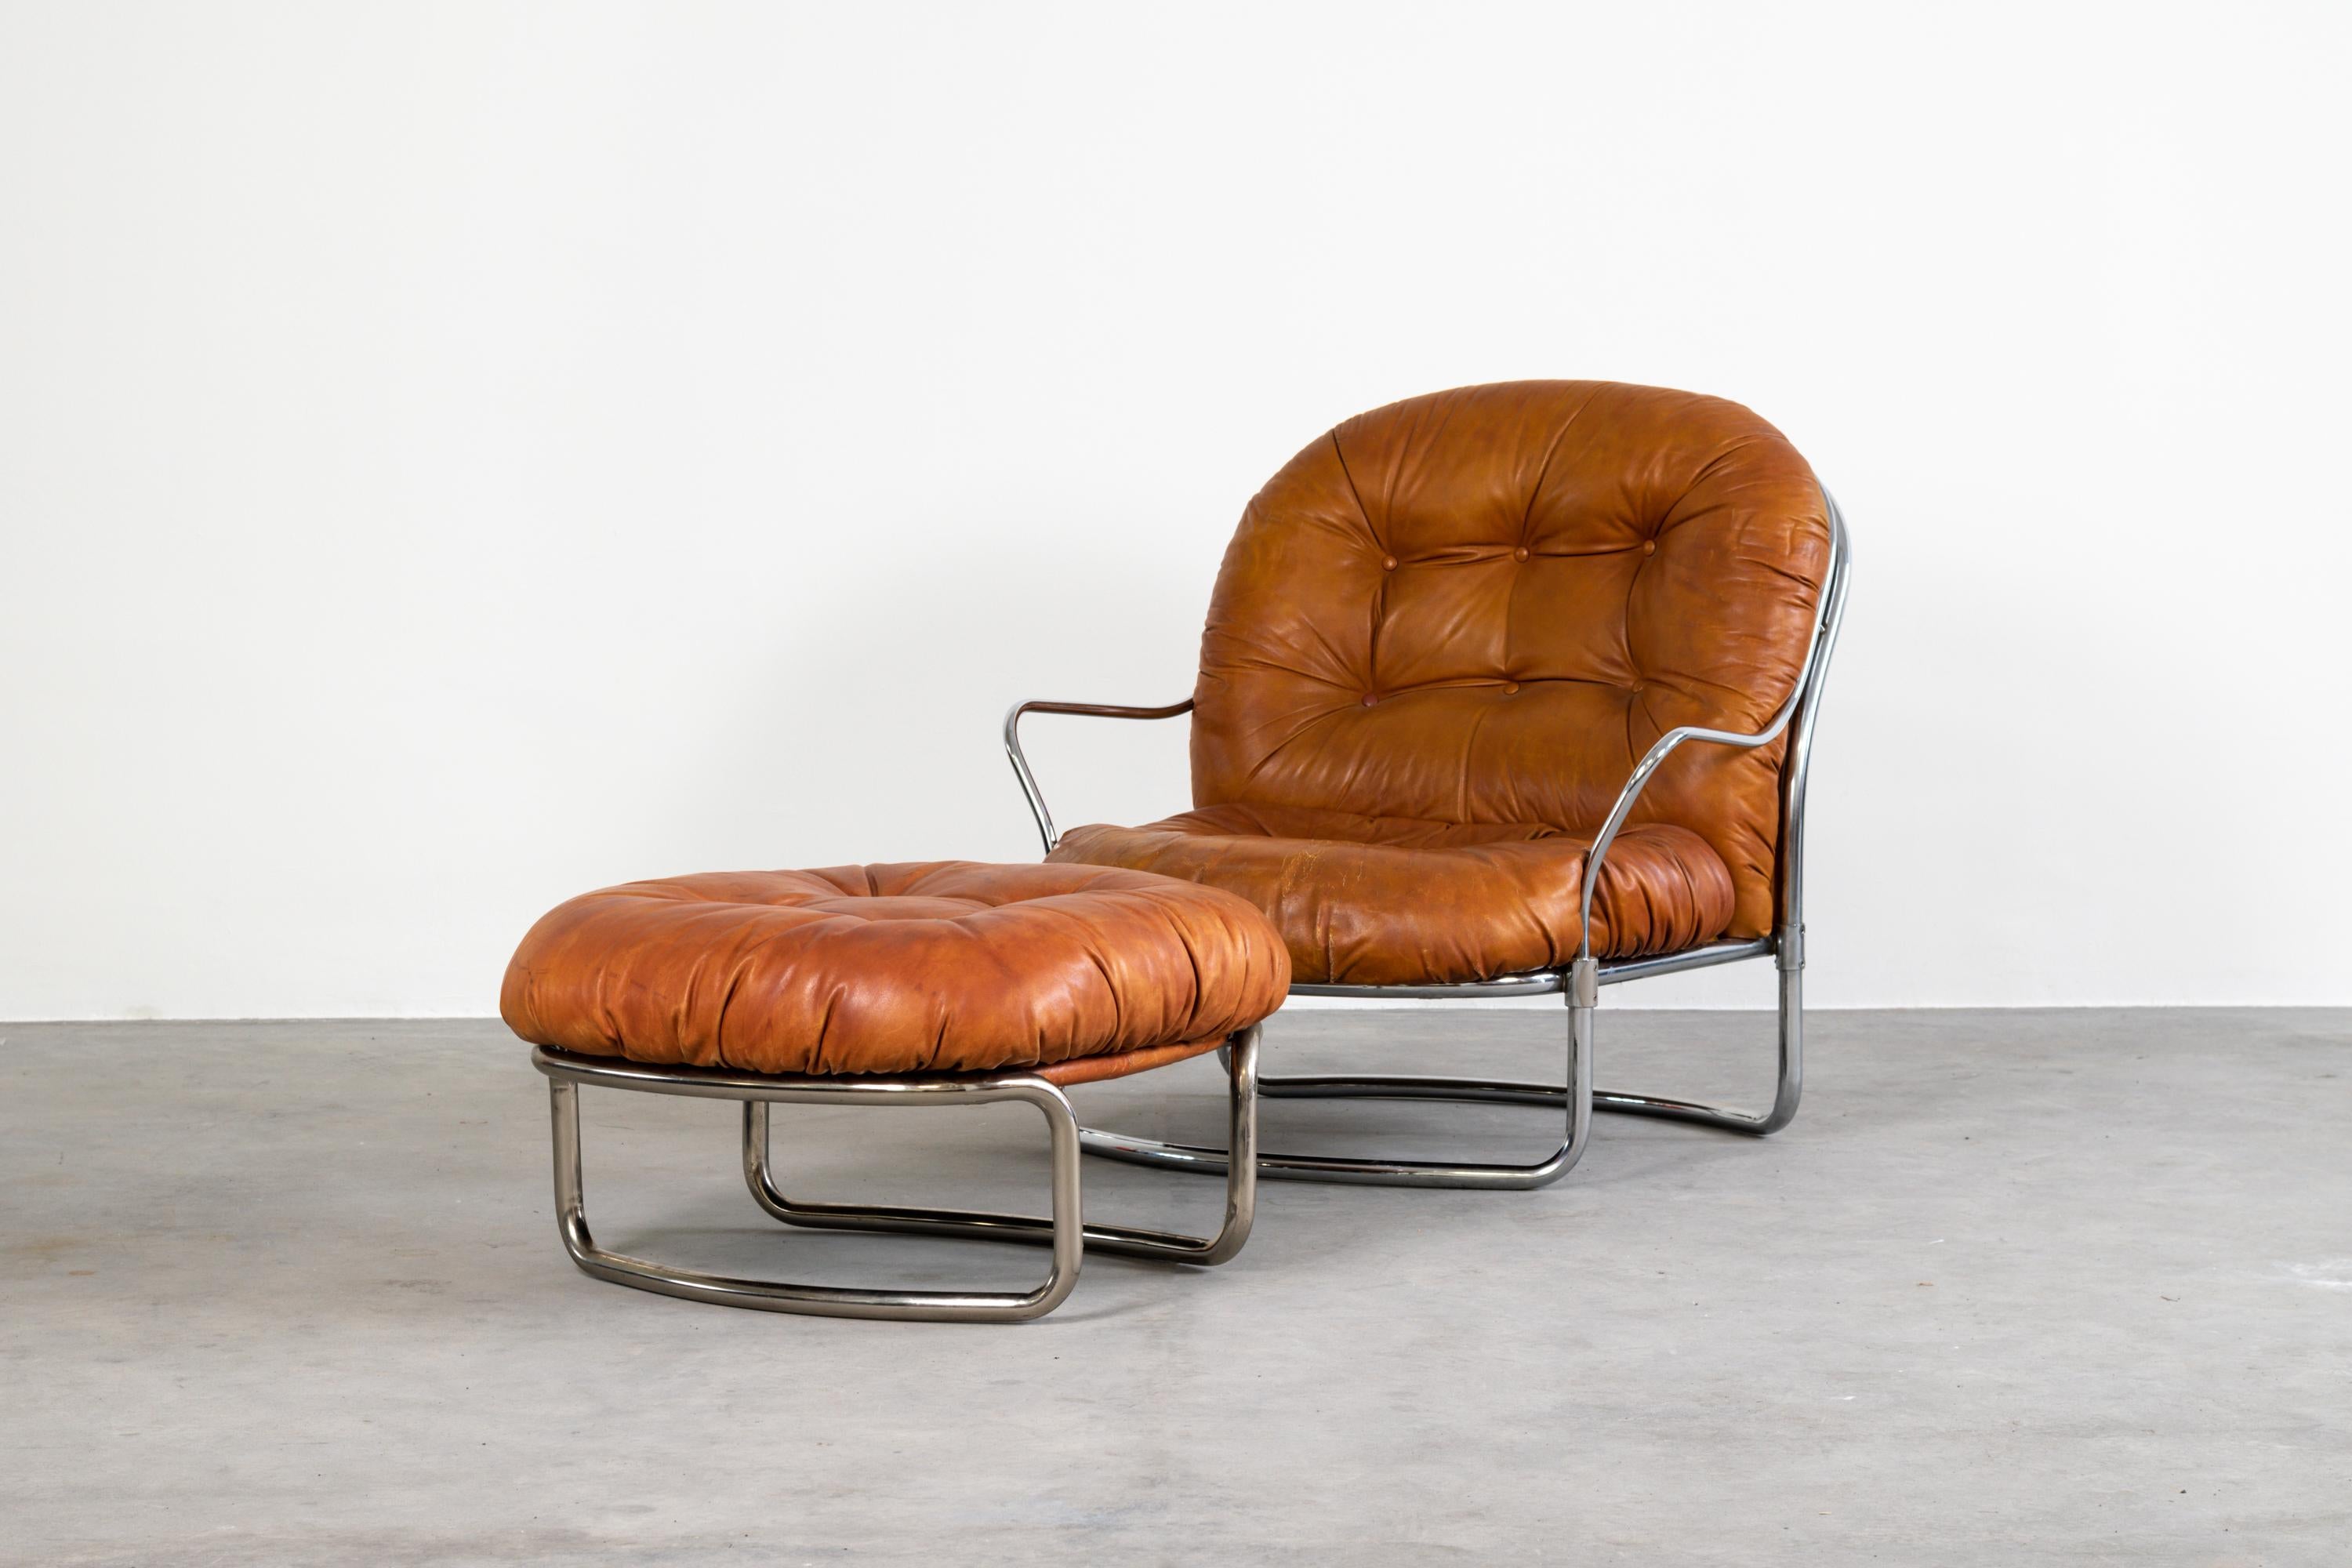 Set with armchair and footrest model 915 designed by Carlo de Carli for Cinova, 1969.
Armchair and footrest with chrome-plated steel upholstered with original cognac leather.

Measures: Armchair 83 x 85 x 90 cm
Footrest 32 x 70 x 70 cm.